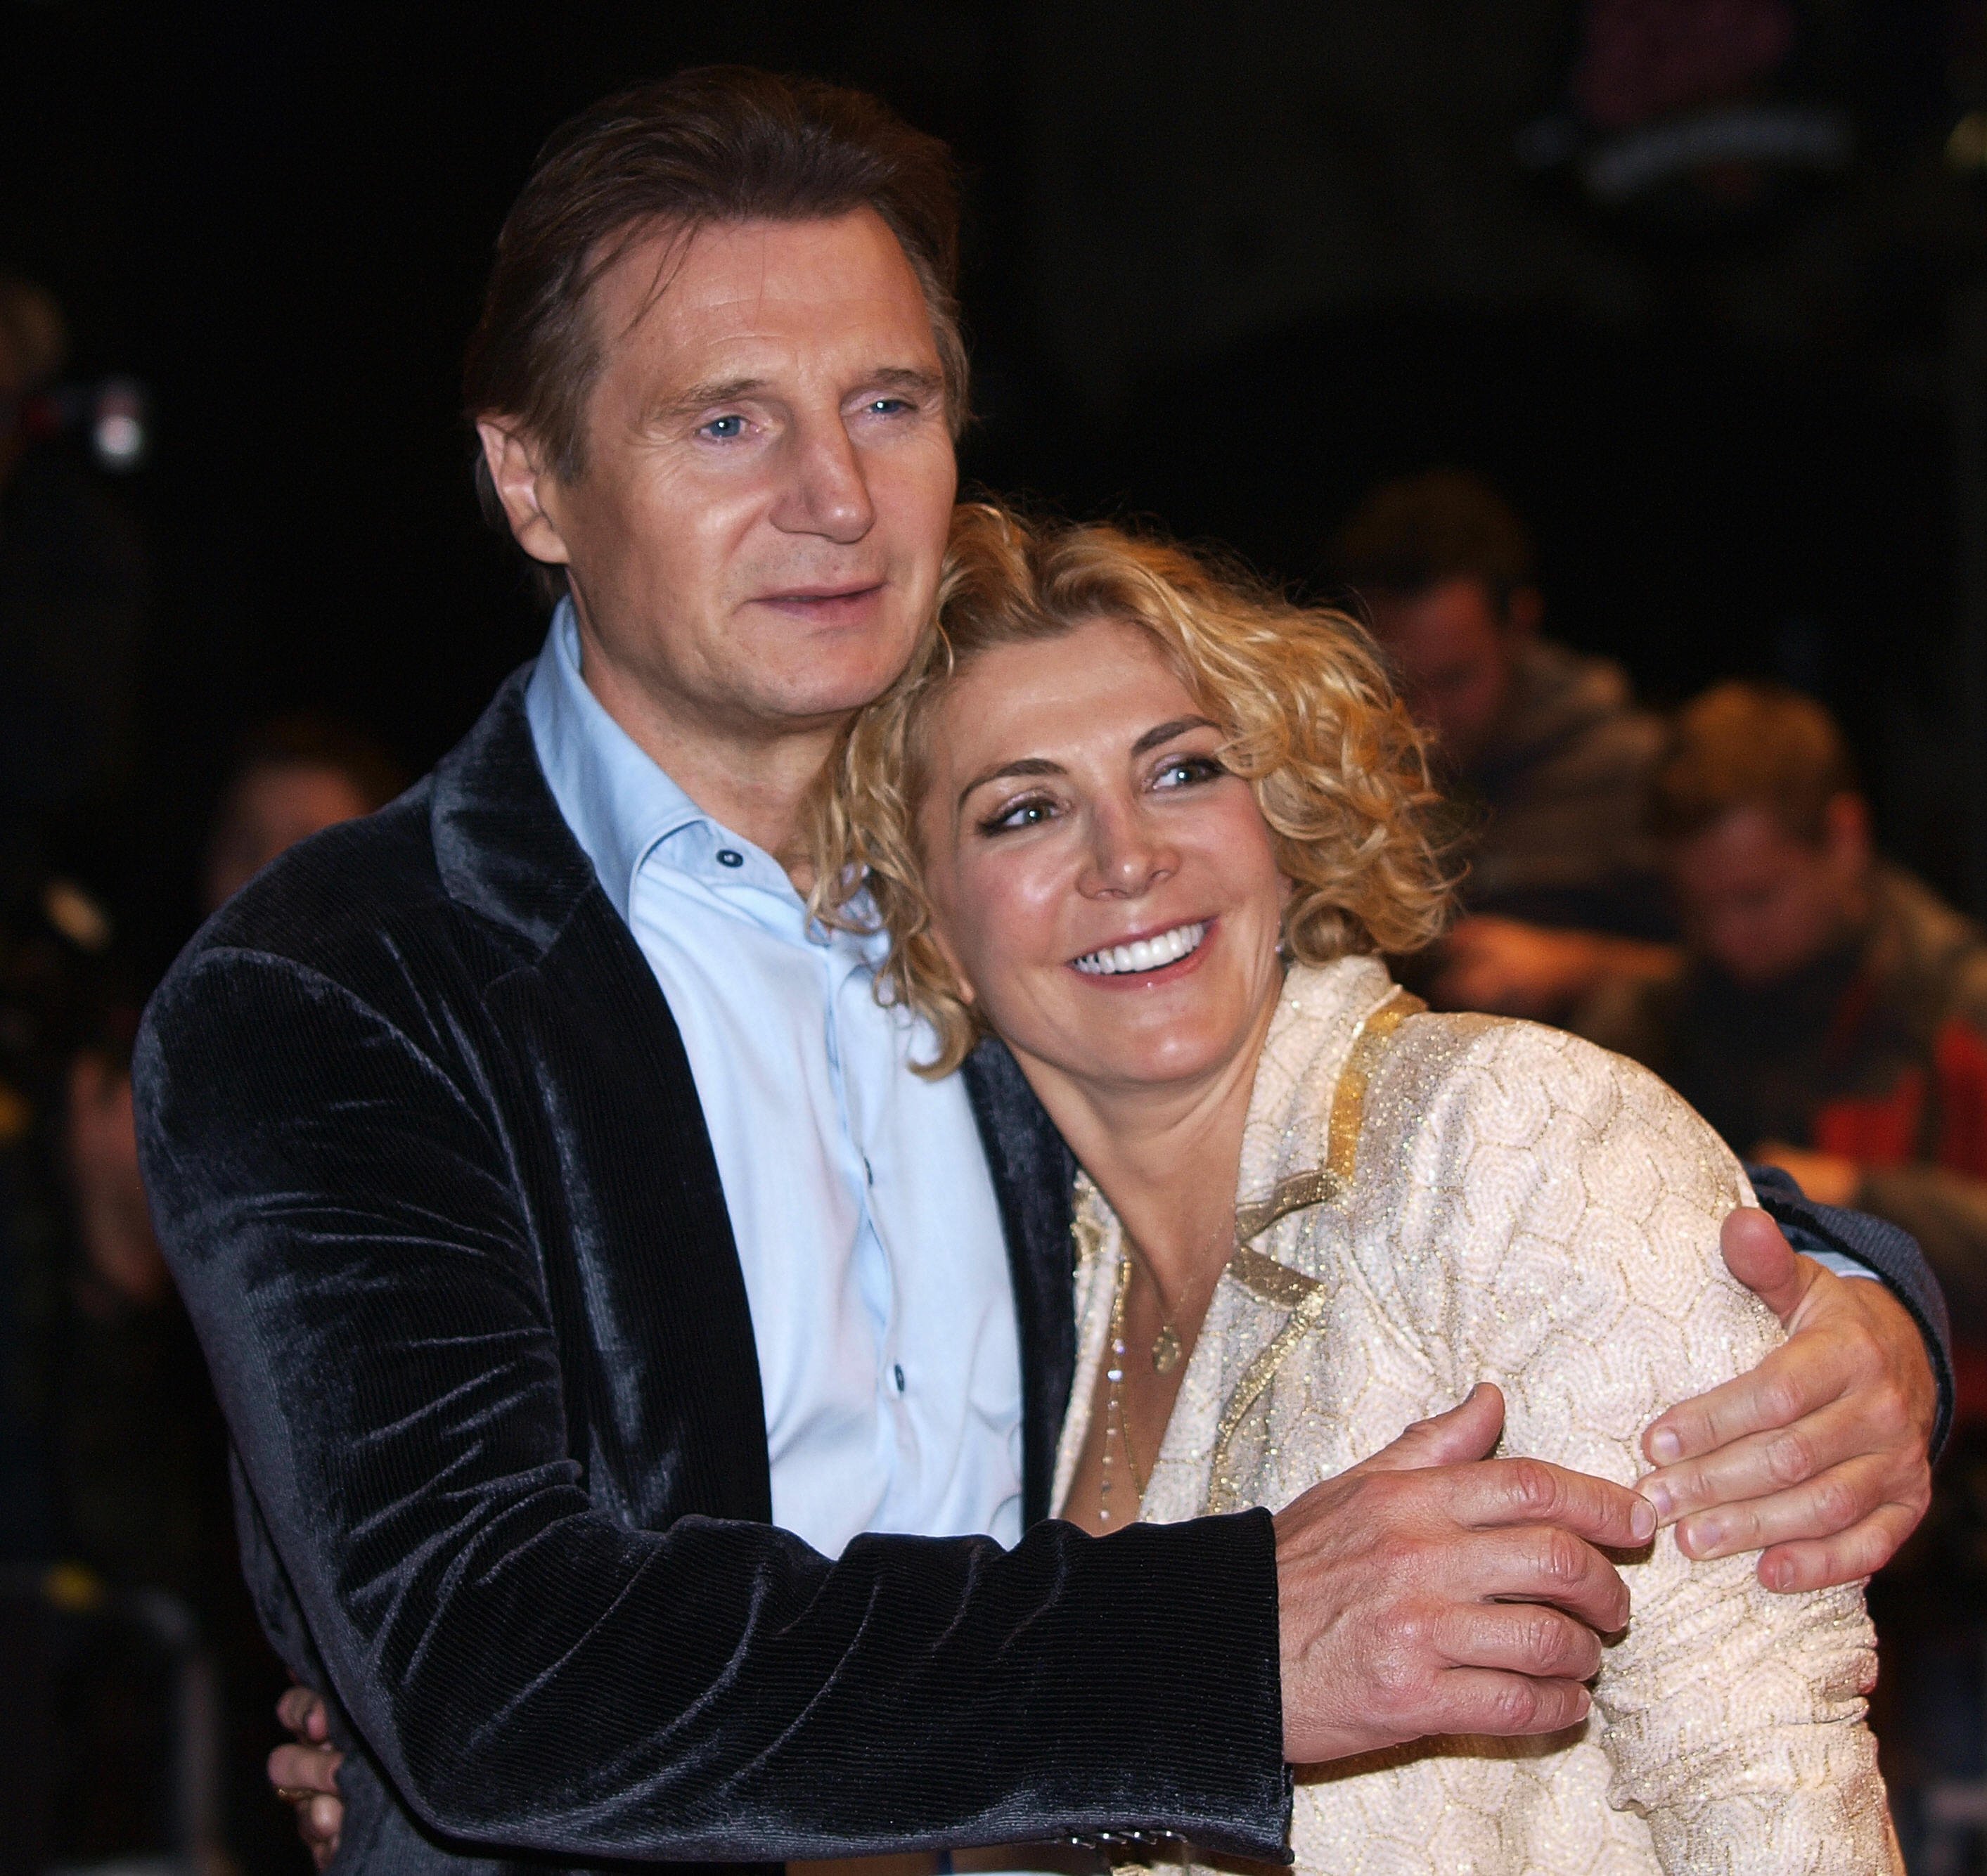 Liam Neeson with his actress wife Natasha Richardson during the British premiere of his latest film, "The Other Man", in London's Leicester Square in 2008. | Source: Getty Images